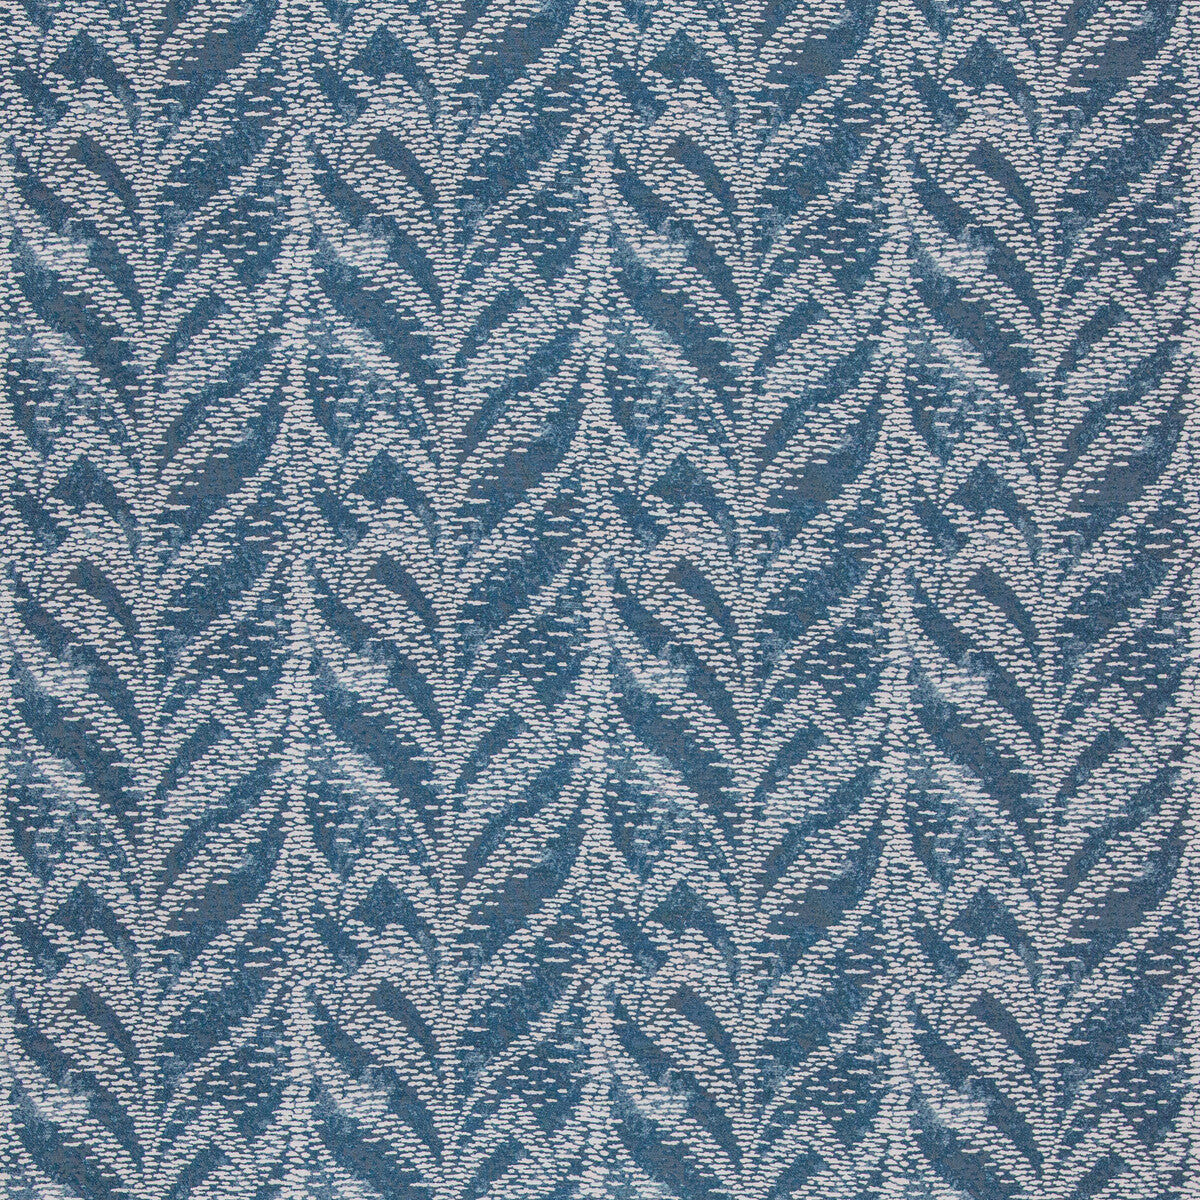 Pompano fabric in marine color - pattern 35818.5.0 - by Kravet Design in the Indoor / Outdoor collection